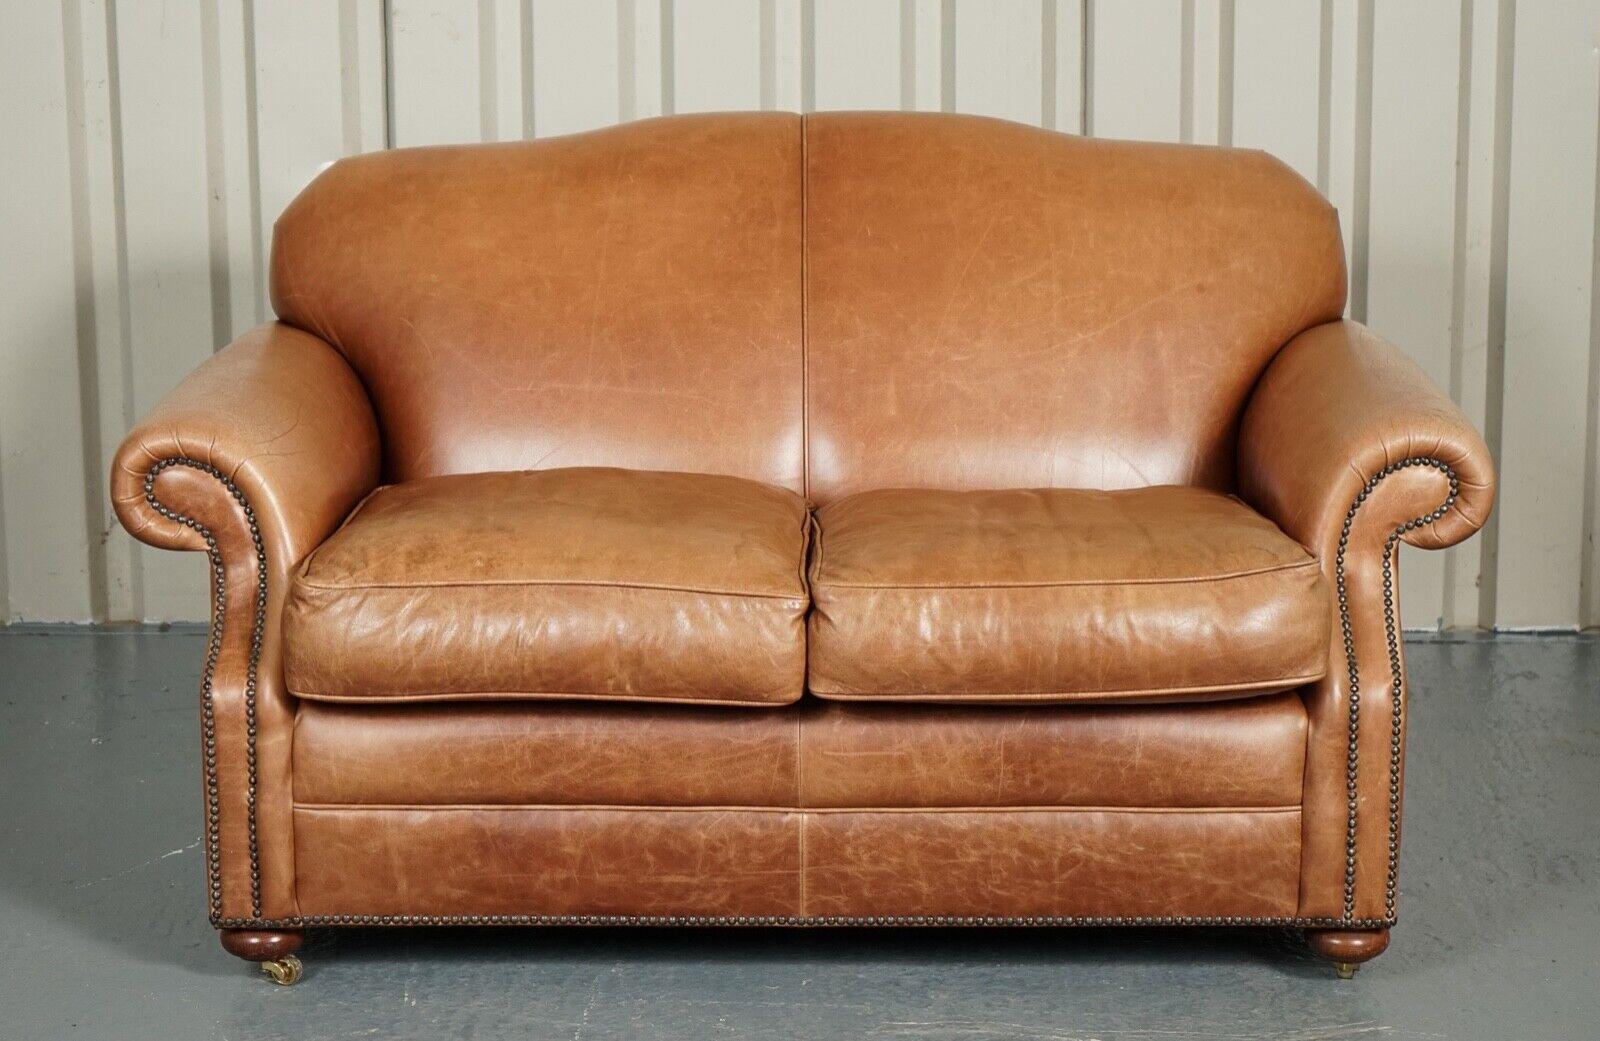 Hand-Crafted Vintage Brown Leather 2 to 3 Seater Sofa by Laura Ashley